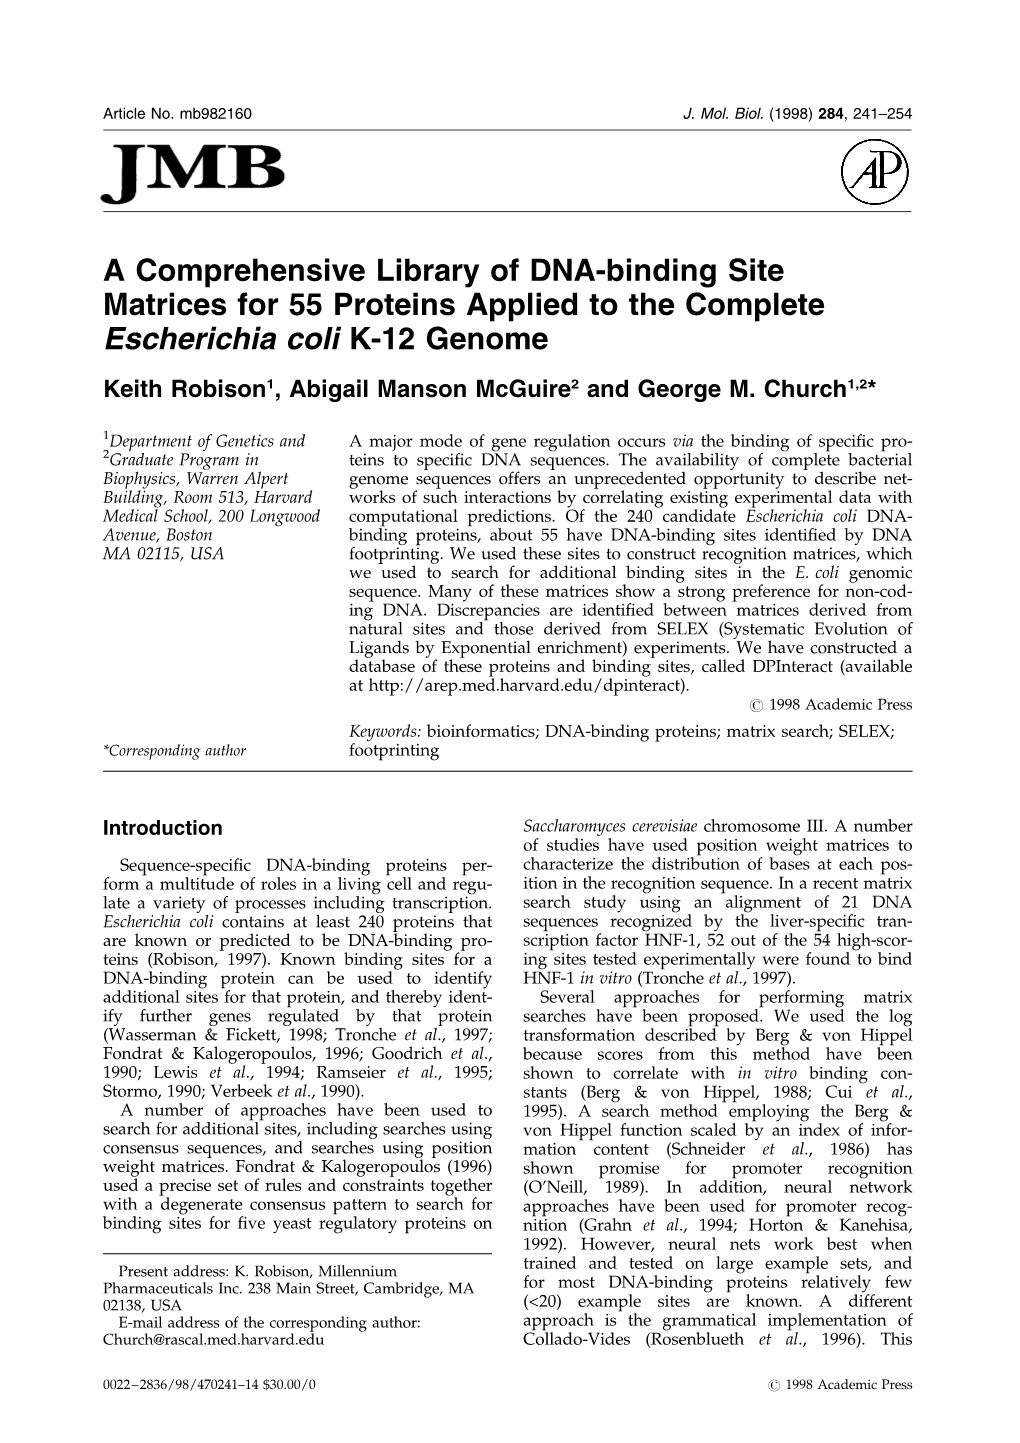 A Comprehensive Library of DNA-Binding Site Matrices for 55